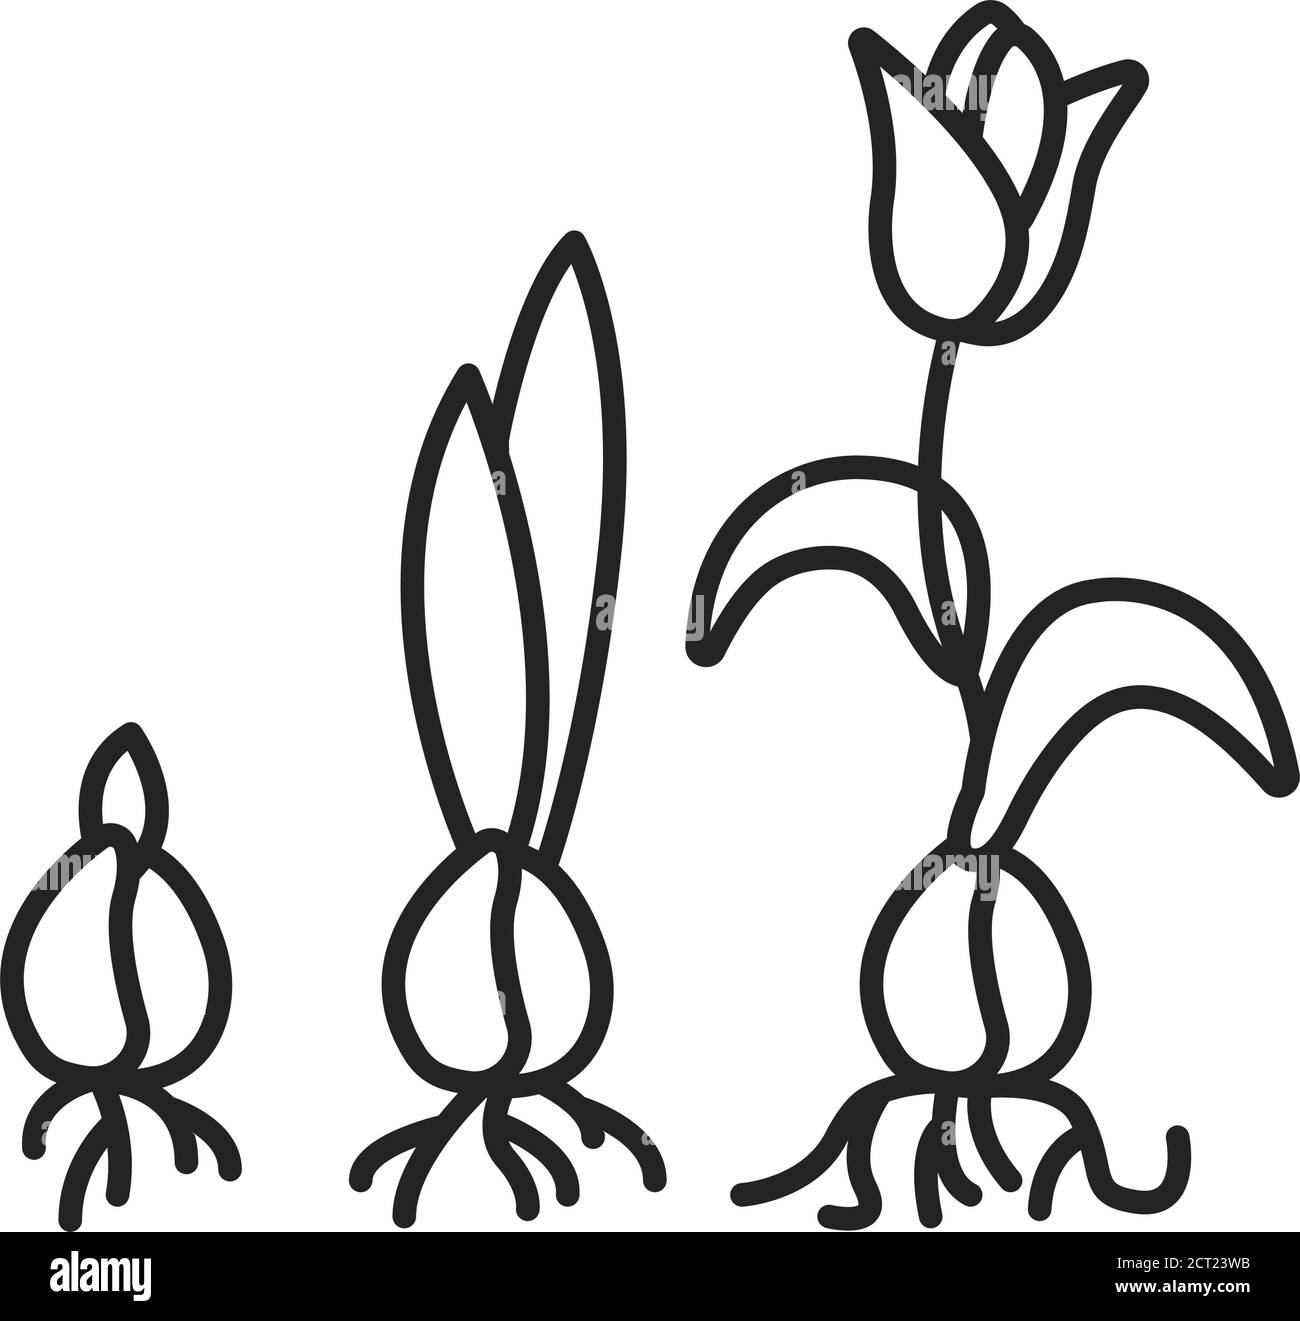 Growing plant stages black line icon. The seed, germination, growth, reproduction, pollination, and seed spreading. Pictogram for web page, mobile app Stock Vector